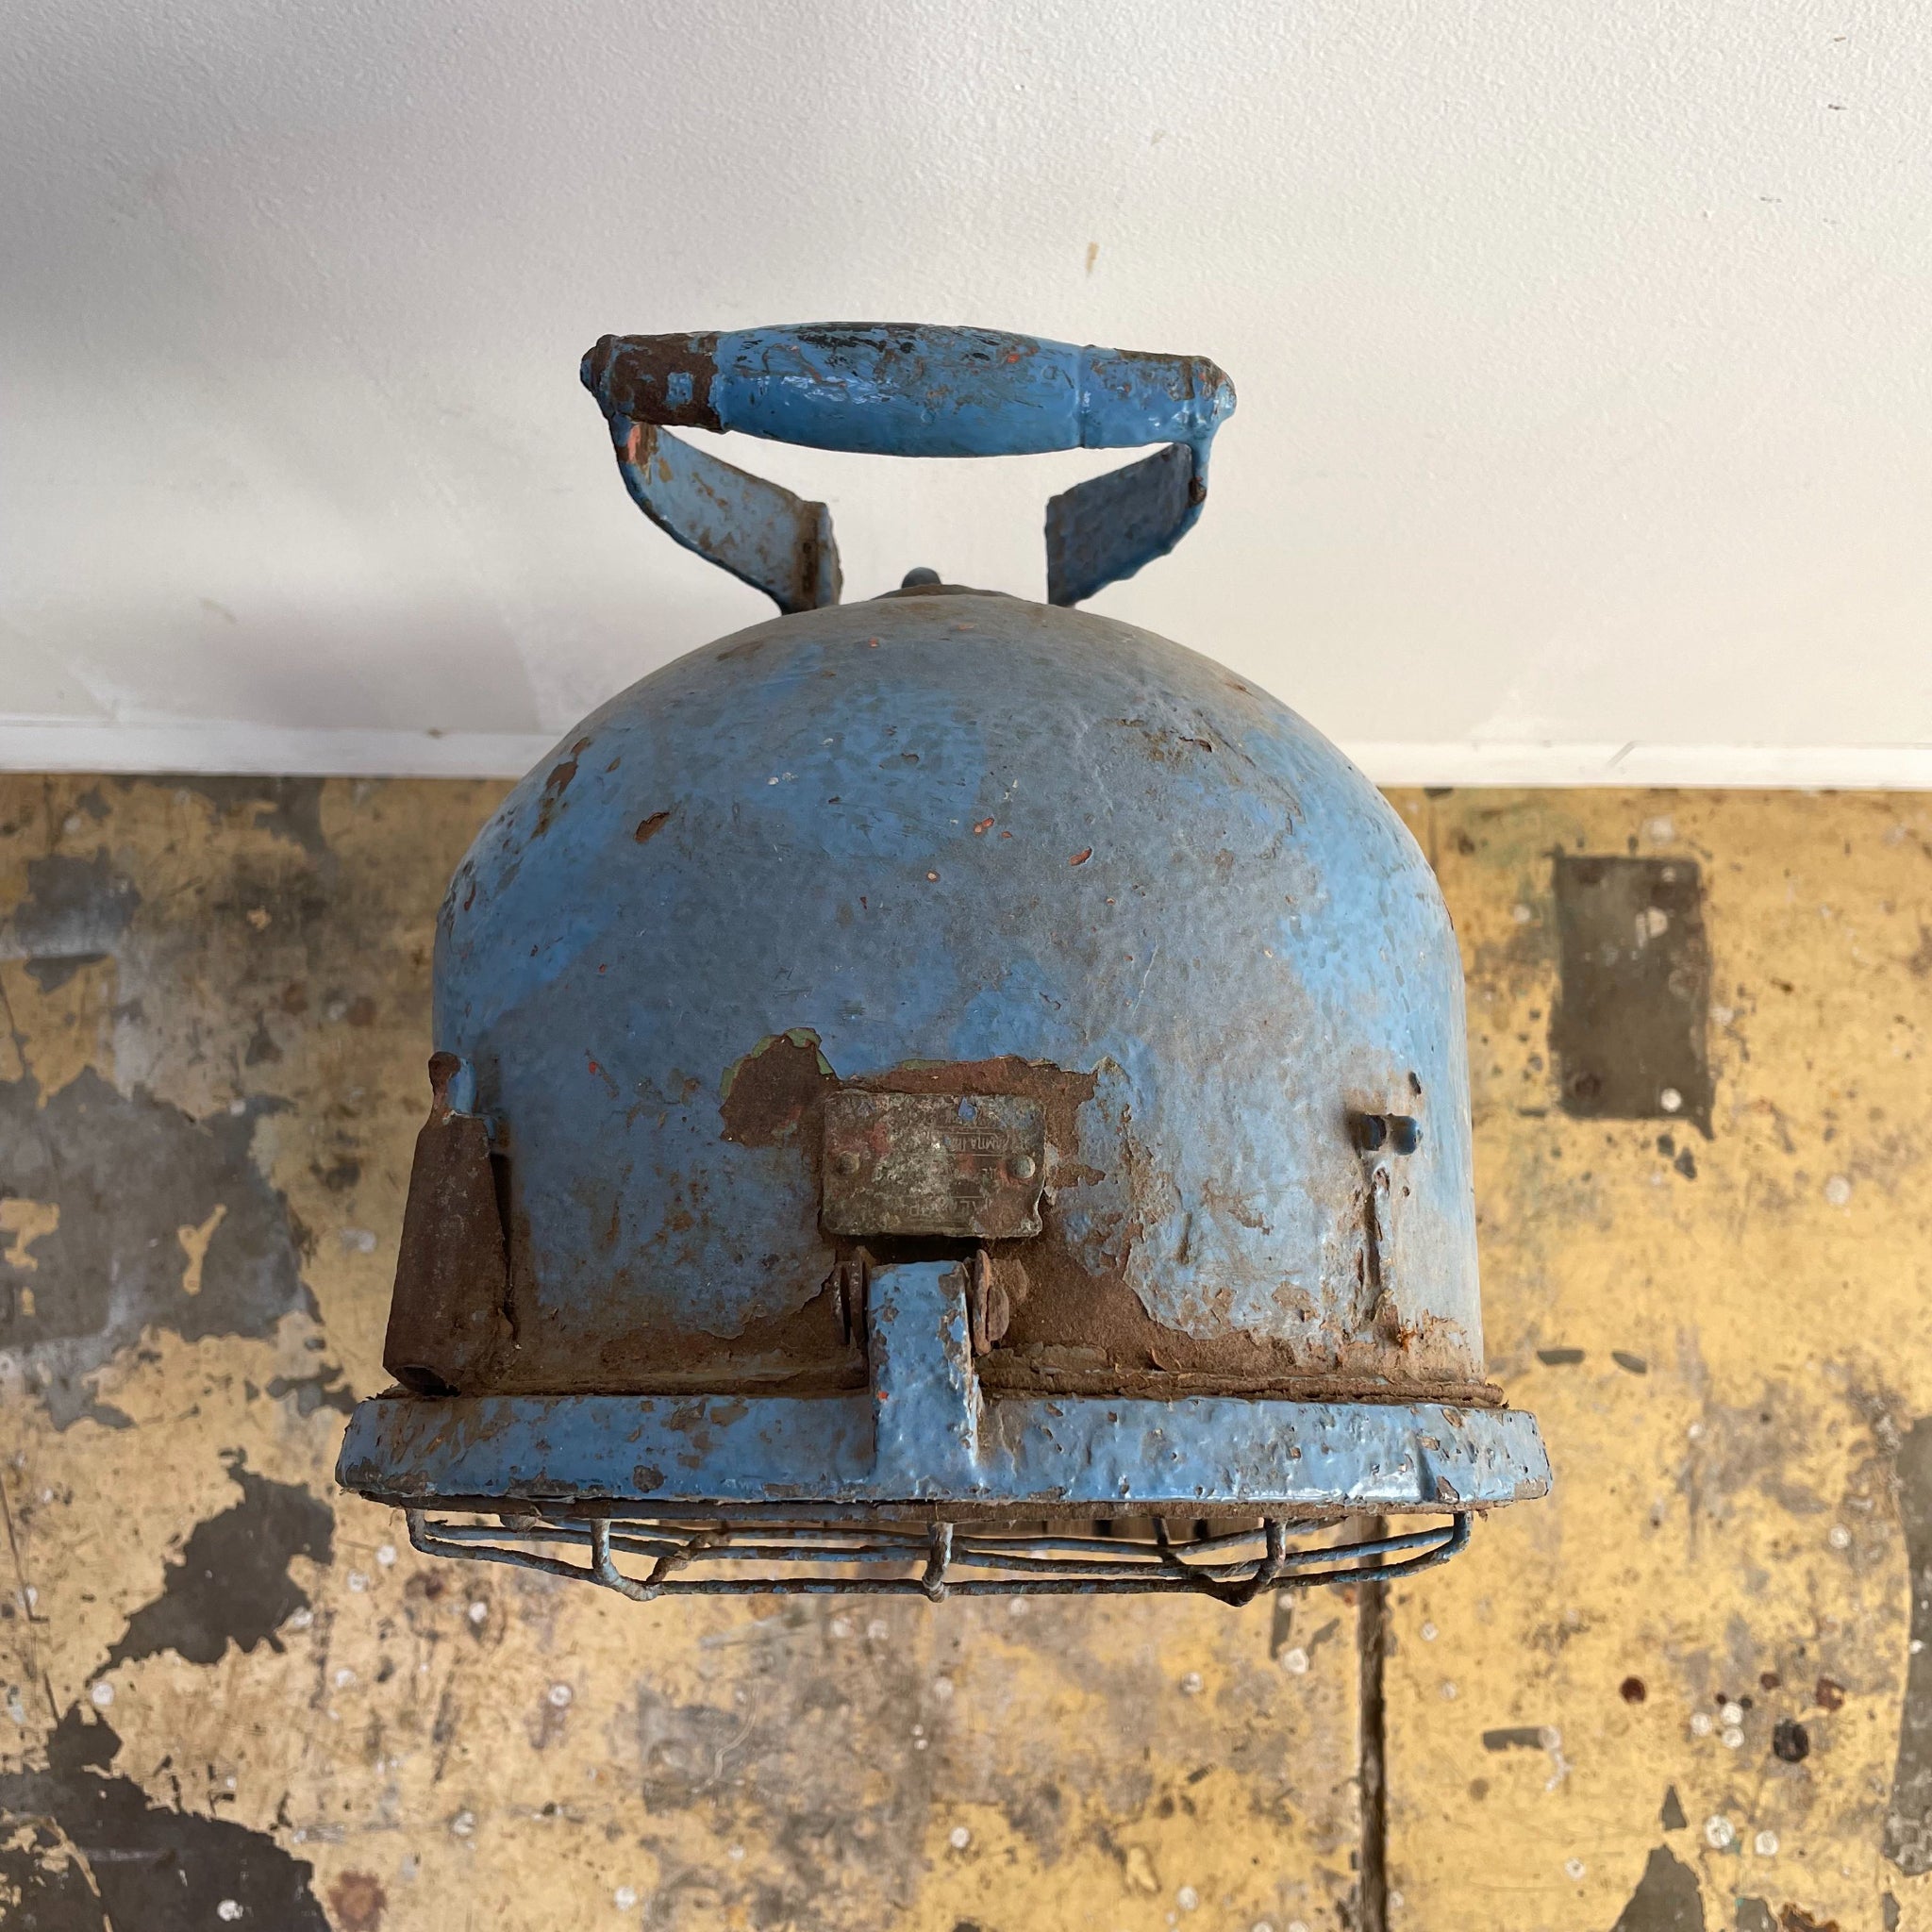 Vintage commercial light with handle, blue, outdoor lighting. 